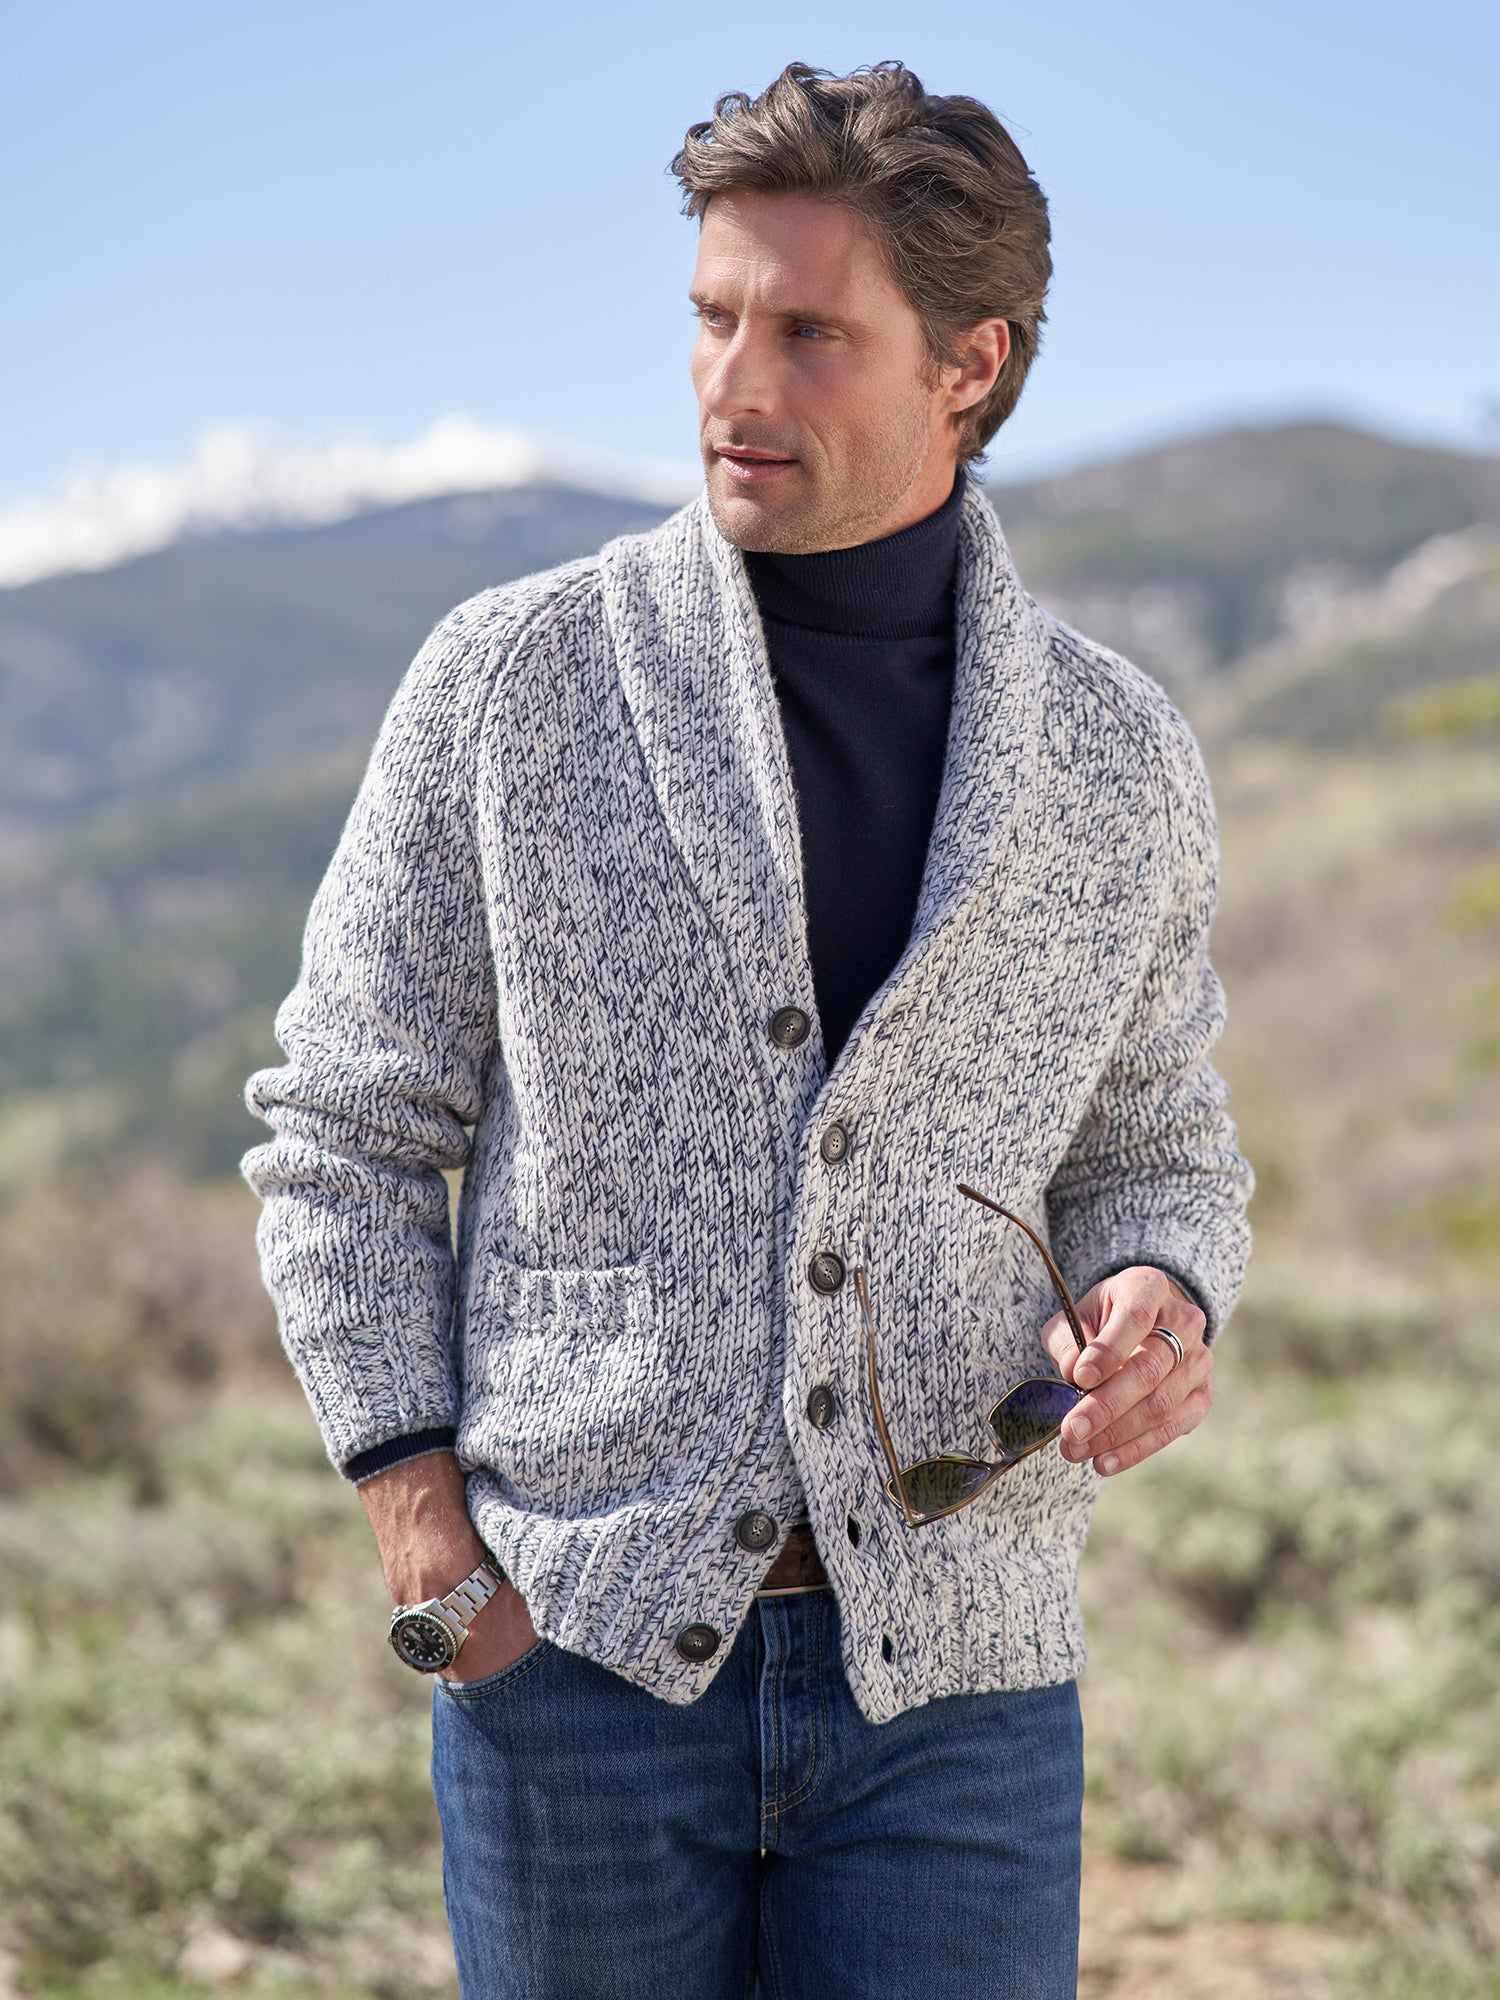 Where to get shawl collar cardigans?